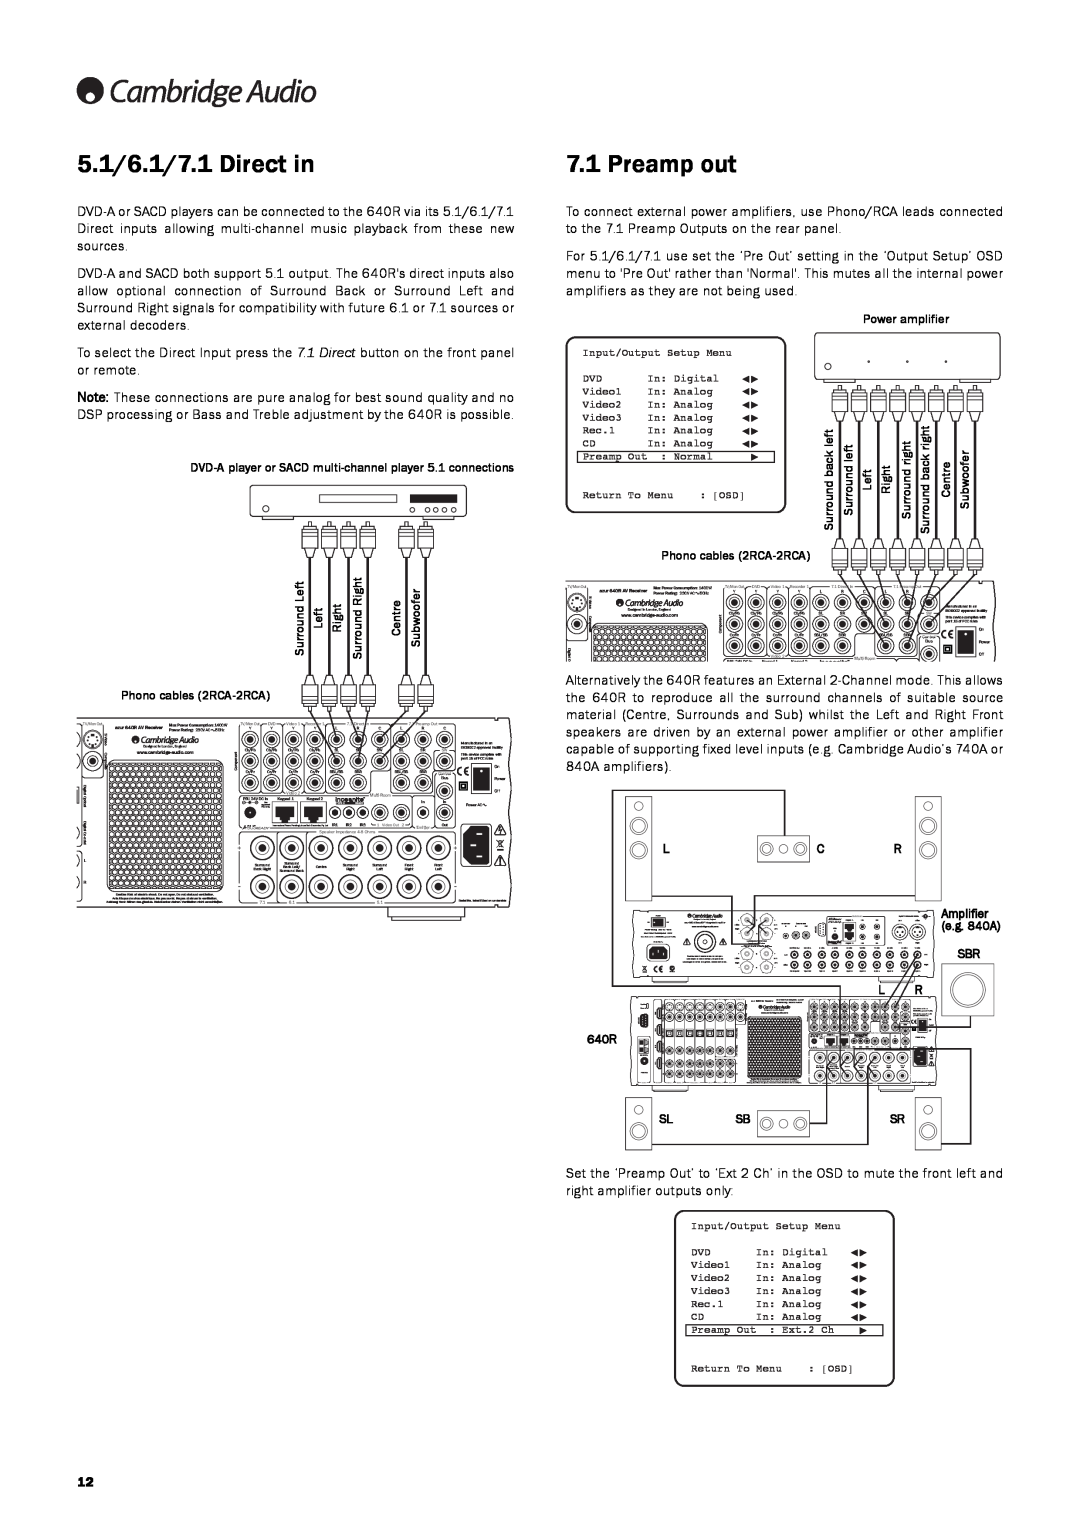 Cambridge Audio 640R user manual 5.1/6.1/7.1 Direct in, Preamp out 